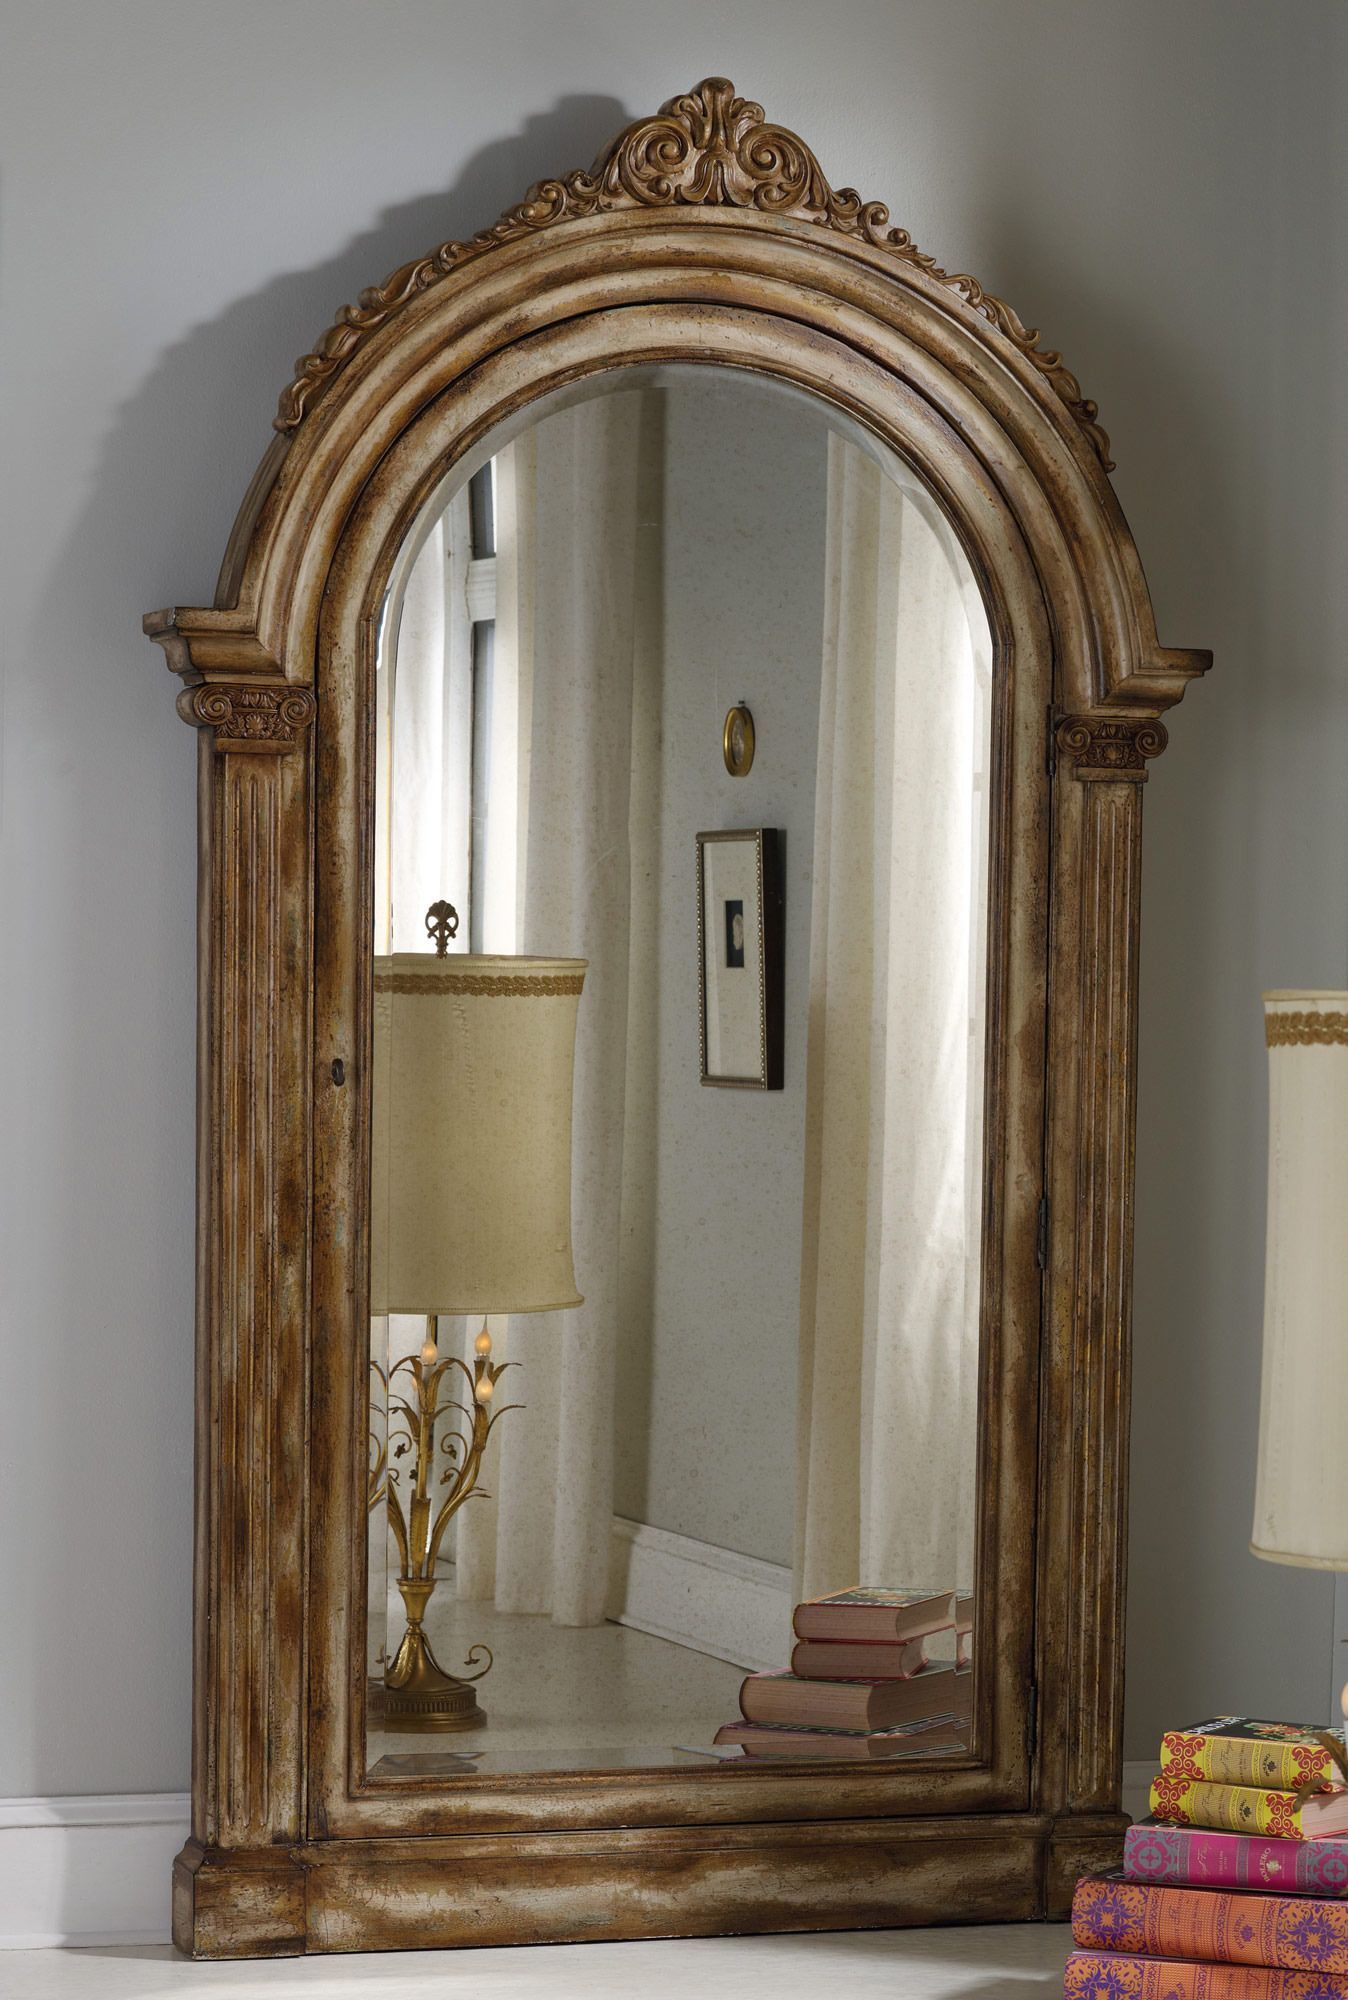 Pin On Wall Mirror Pieces With Hallas Wall Organizer Mirrors (View 9 of 15)